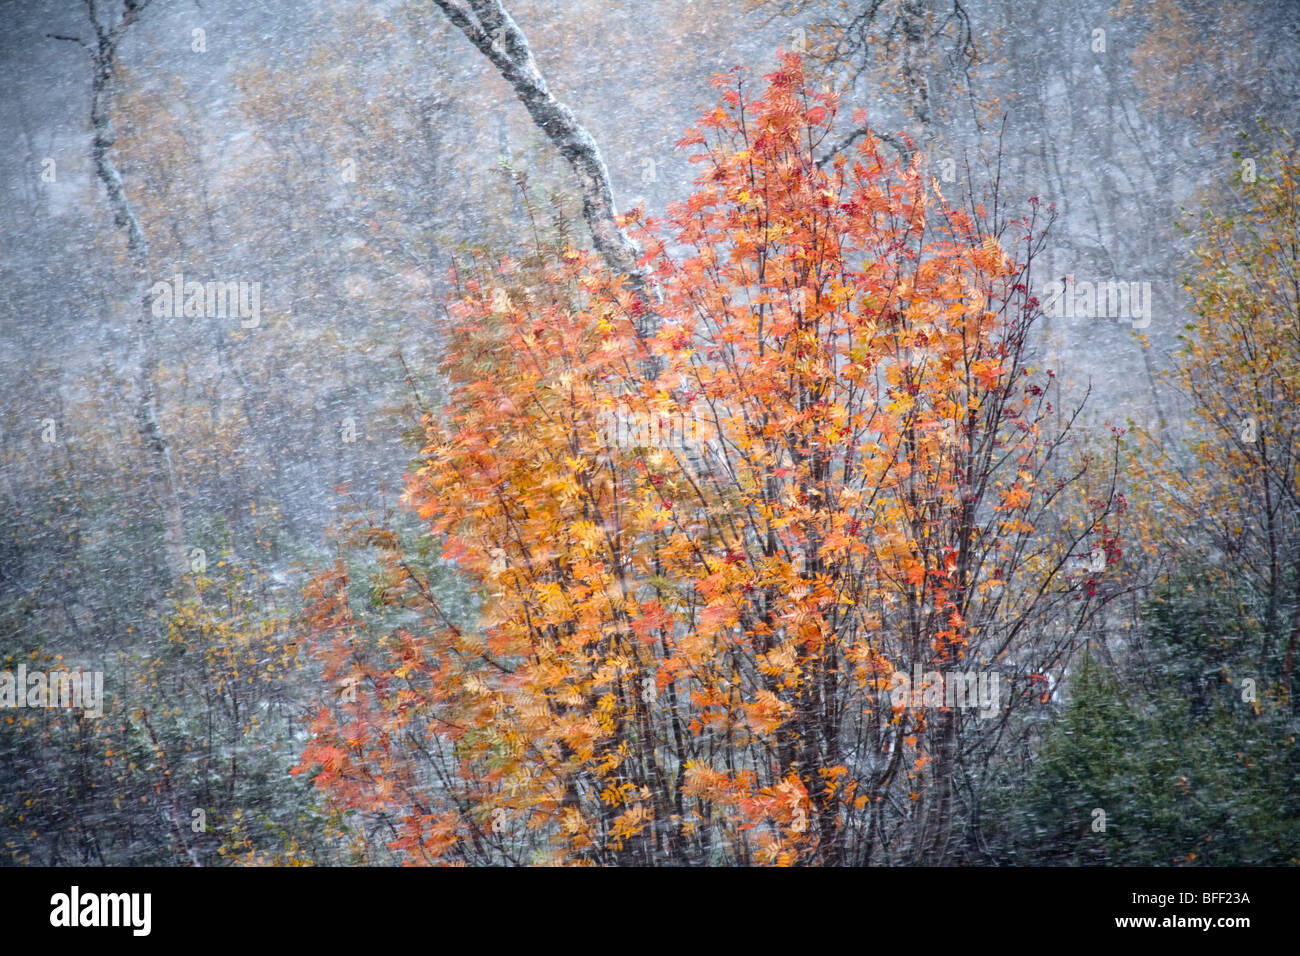 Fjell and birch forest in autumn with first snow and view over snowy forest Stock Photo